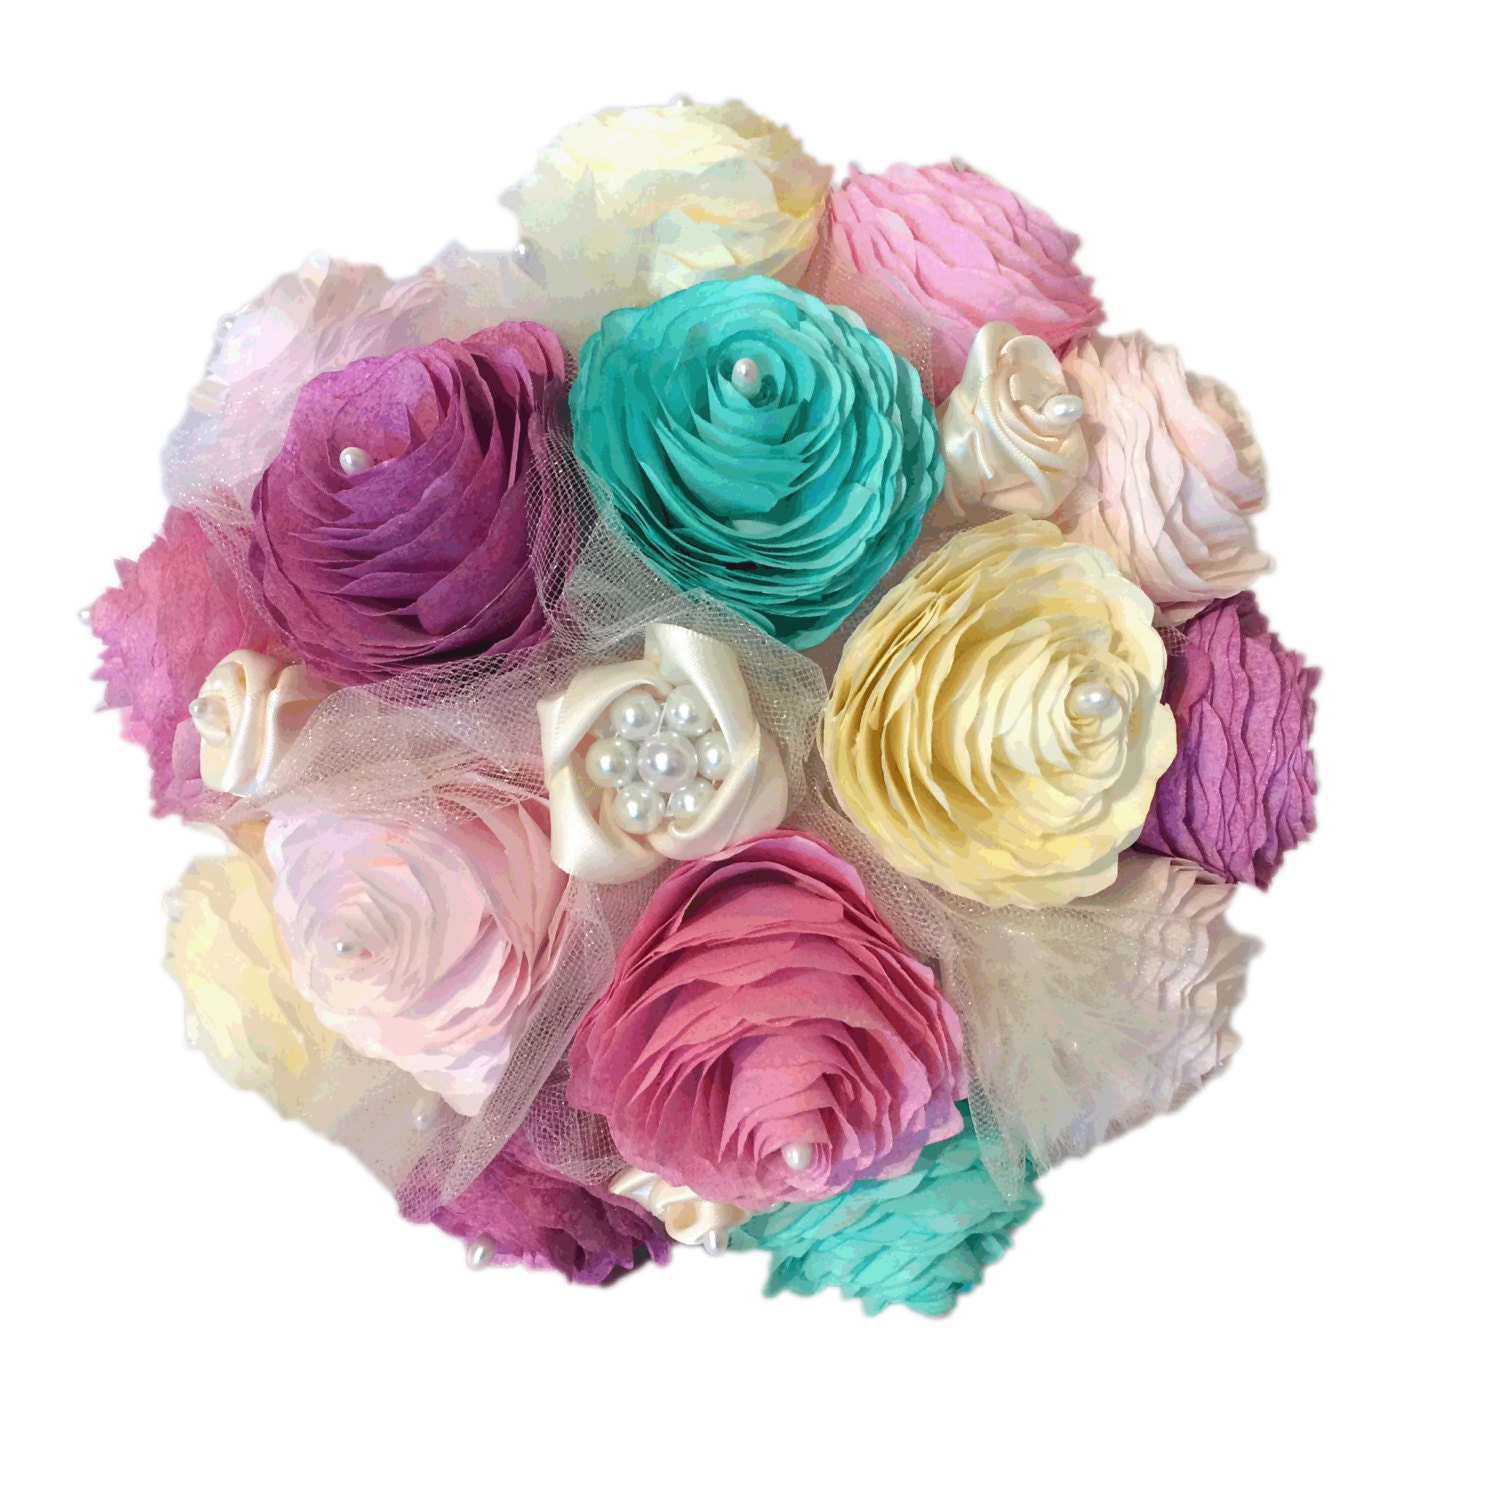 Romantic Peony bouquet, Satin ribbon bouquet, Brooch bouquet, Pink Teal orchid and ivory bouquet, Lace & ribbon bouquet, Paper Peony Bouquet